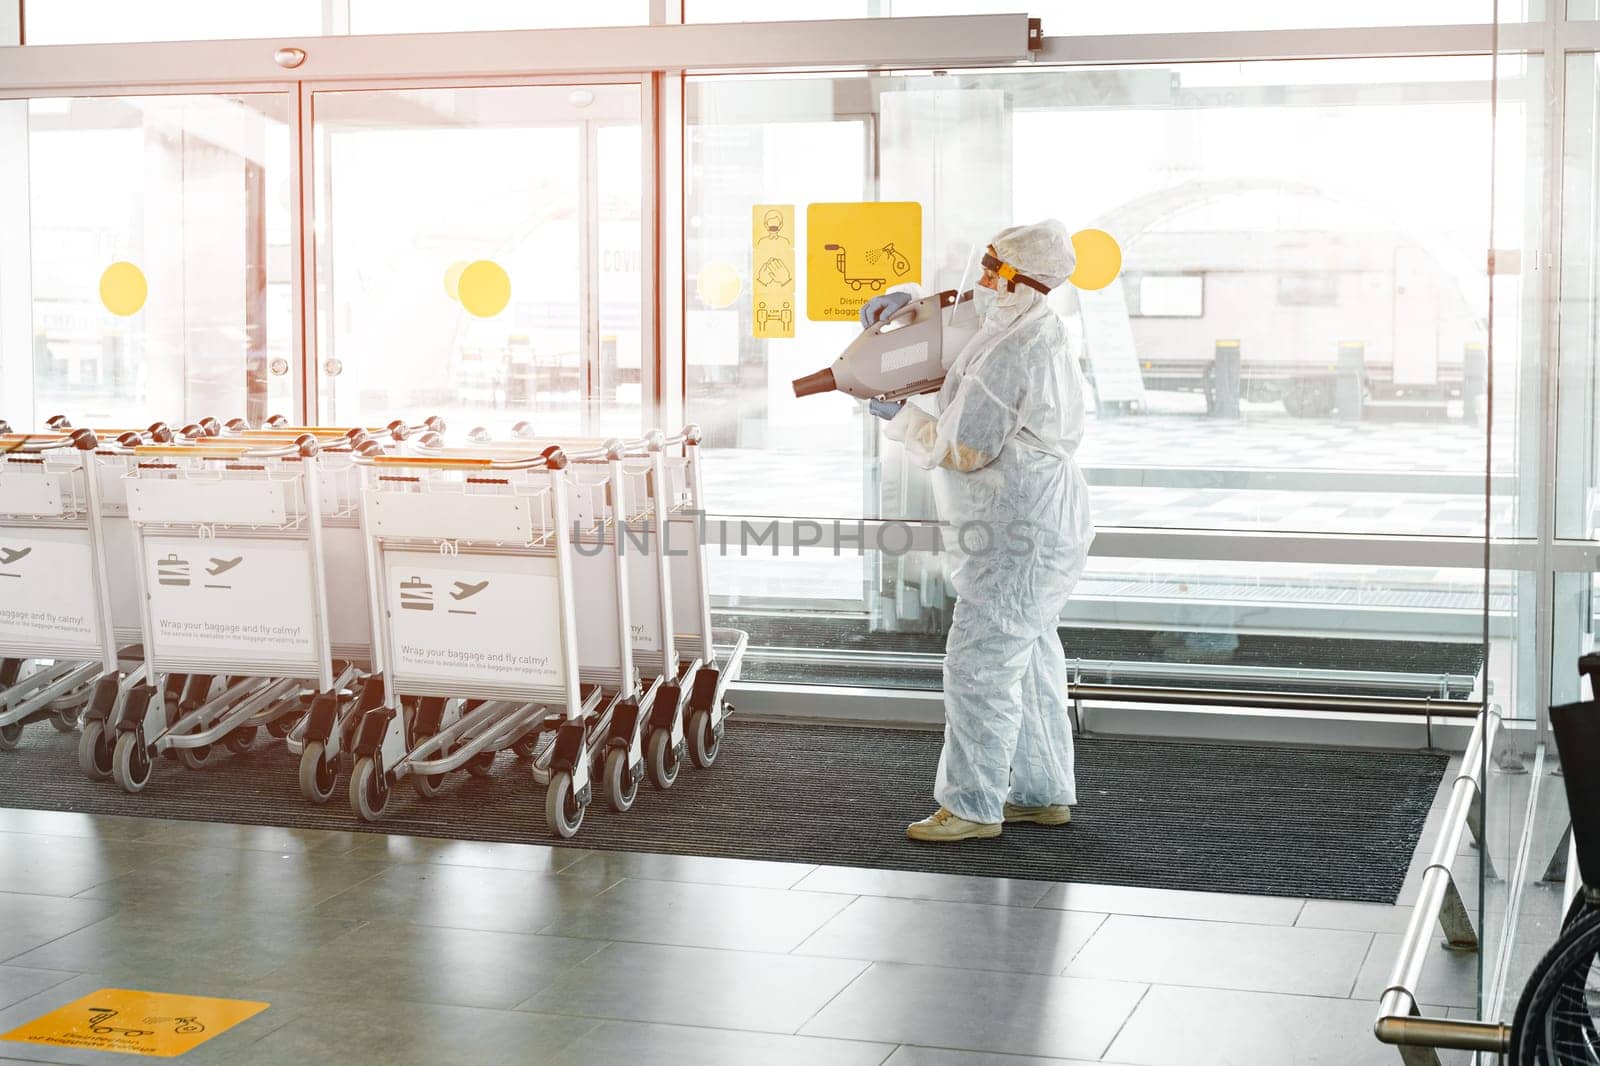 ROSTOV ON DON, RUSSIAN FEDERATION, MARCH, 2021: Sanitary disinfection of airport building preventing the spread of coronavirus infection by Fabrikasimf